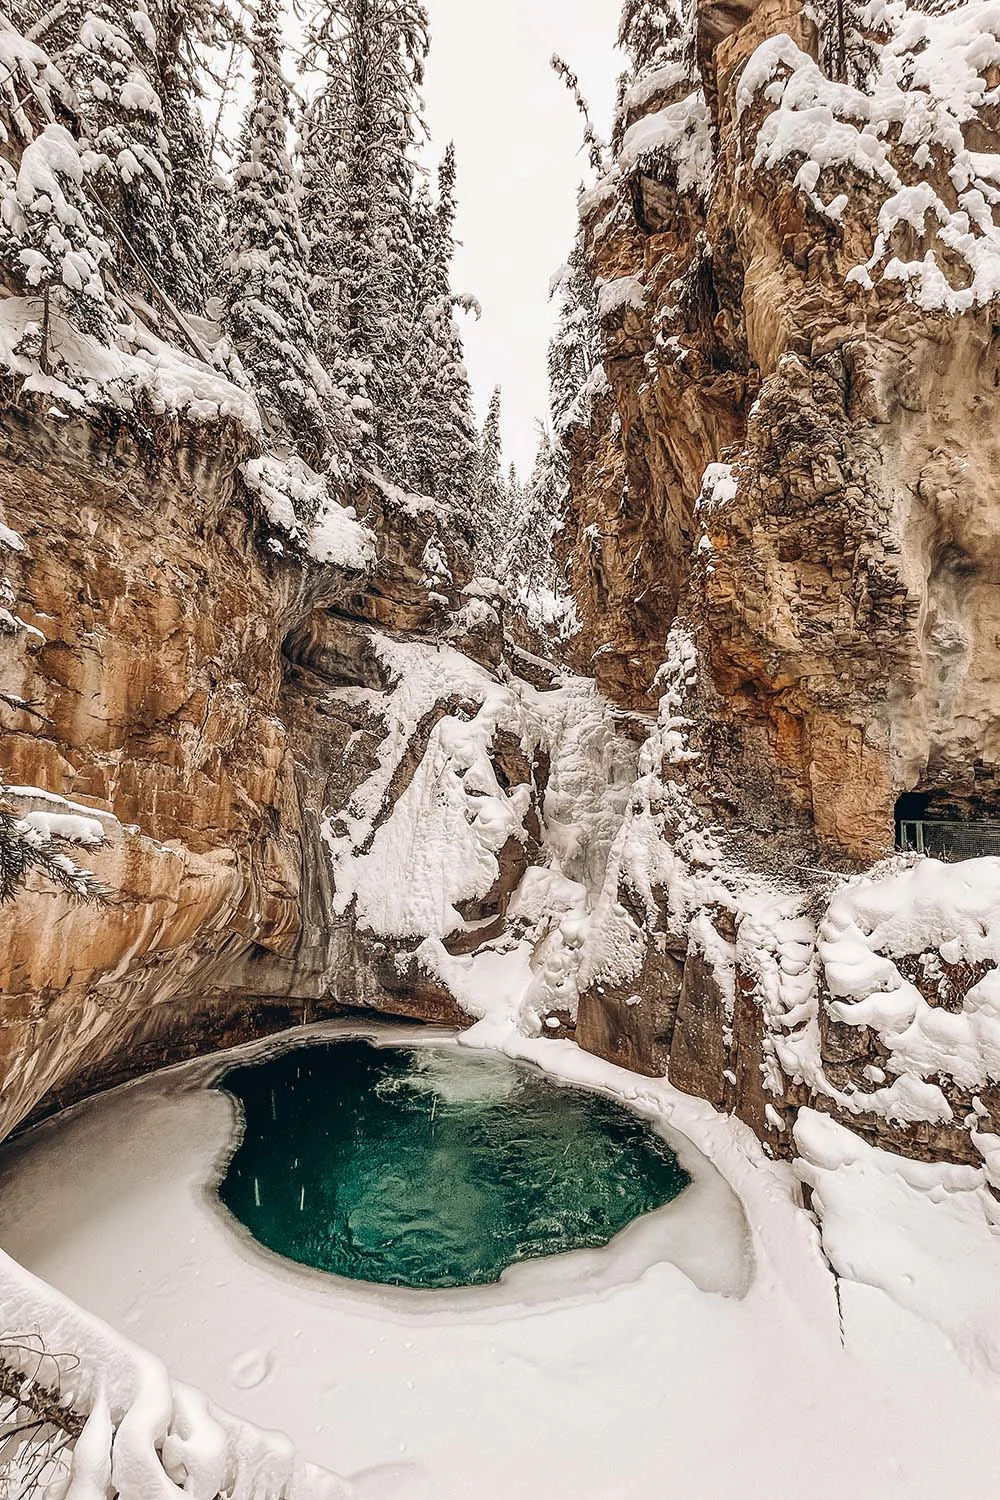 Experiencing the wonders of the Johnston Canyon ice walk is something you absolutely have to do when visiting Banff during the winter months. This guide has everything you need to know before hiking Johnston Canyon in winter. It includes tips on everything from how to prepare, what to wear, special equipment you'll need, how to find the secret cave and more! Pictured here: the Lower Falls